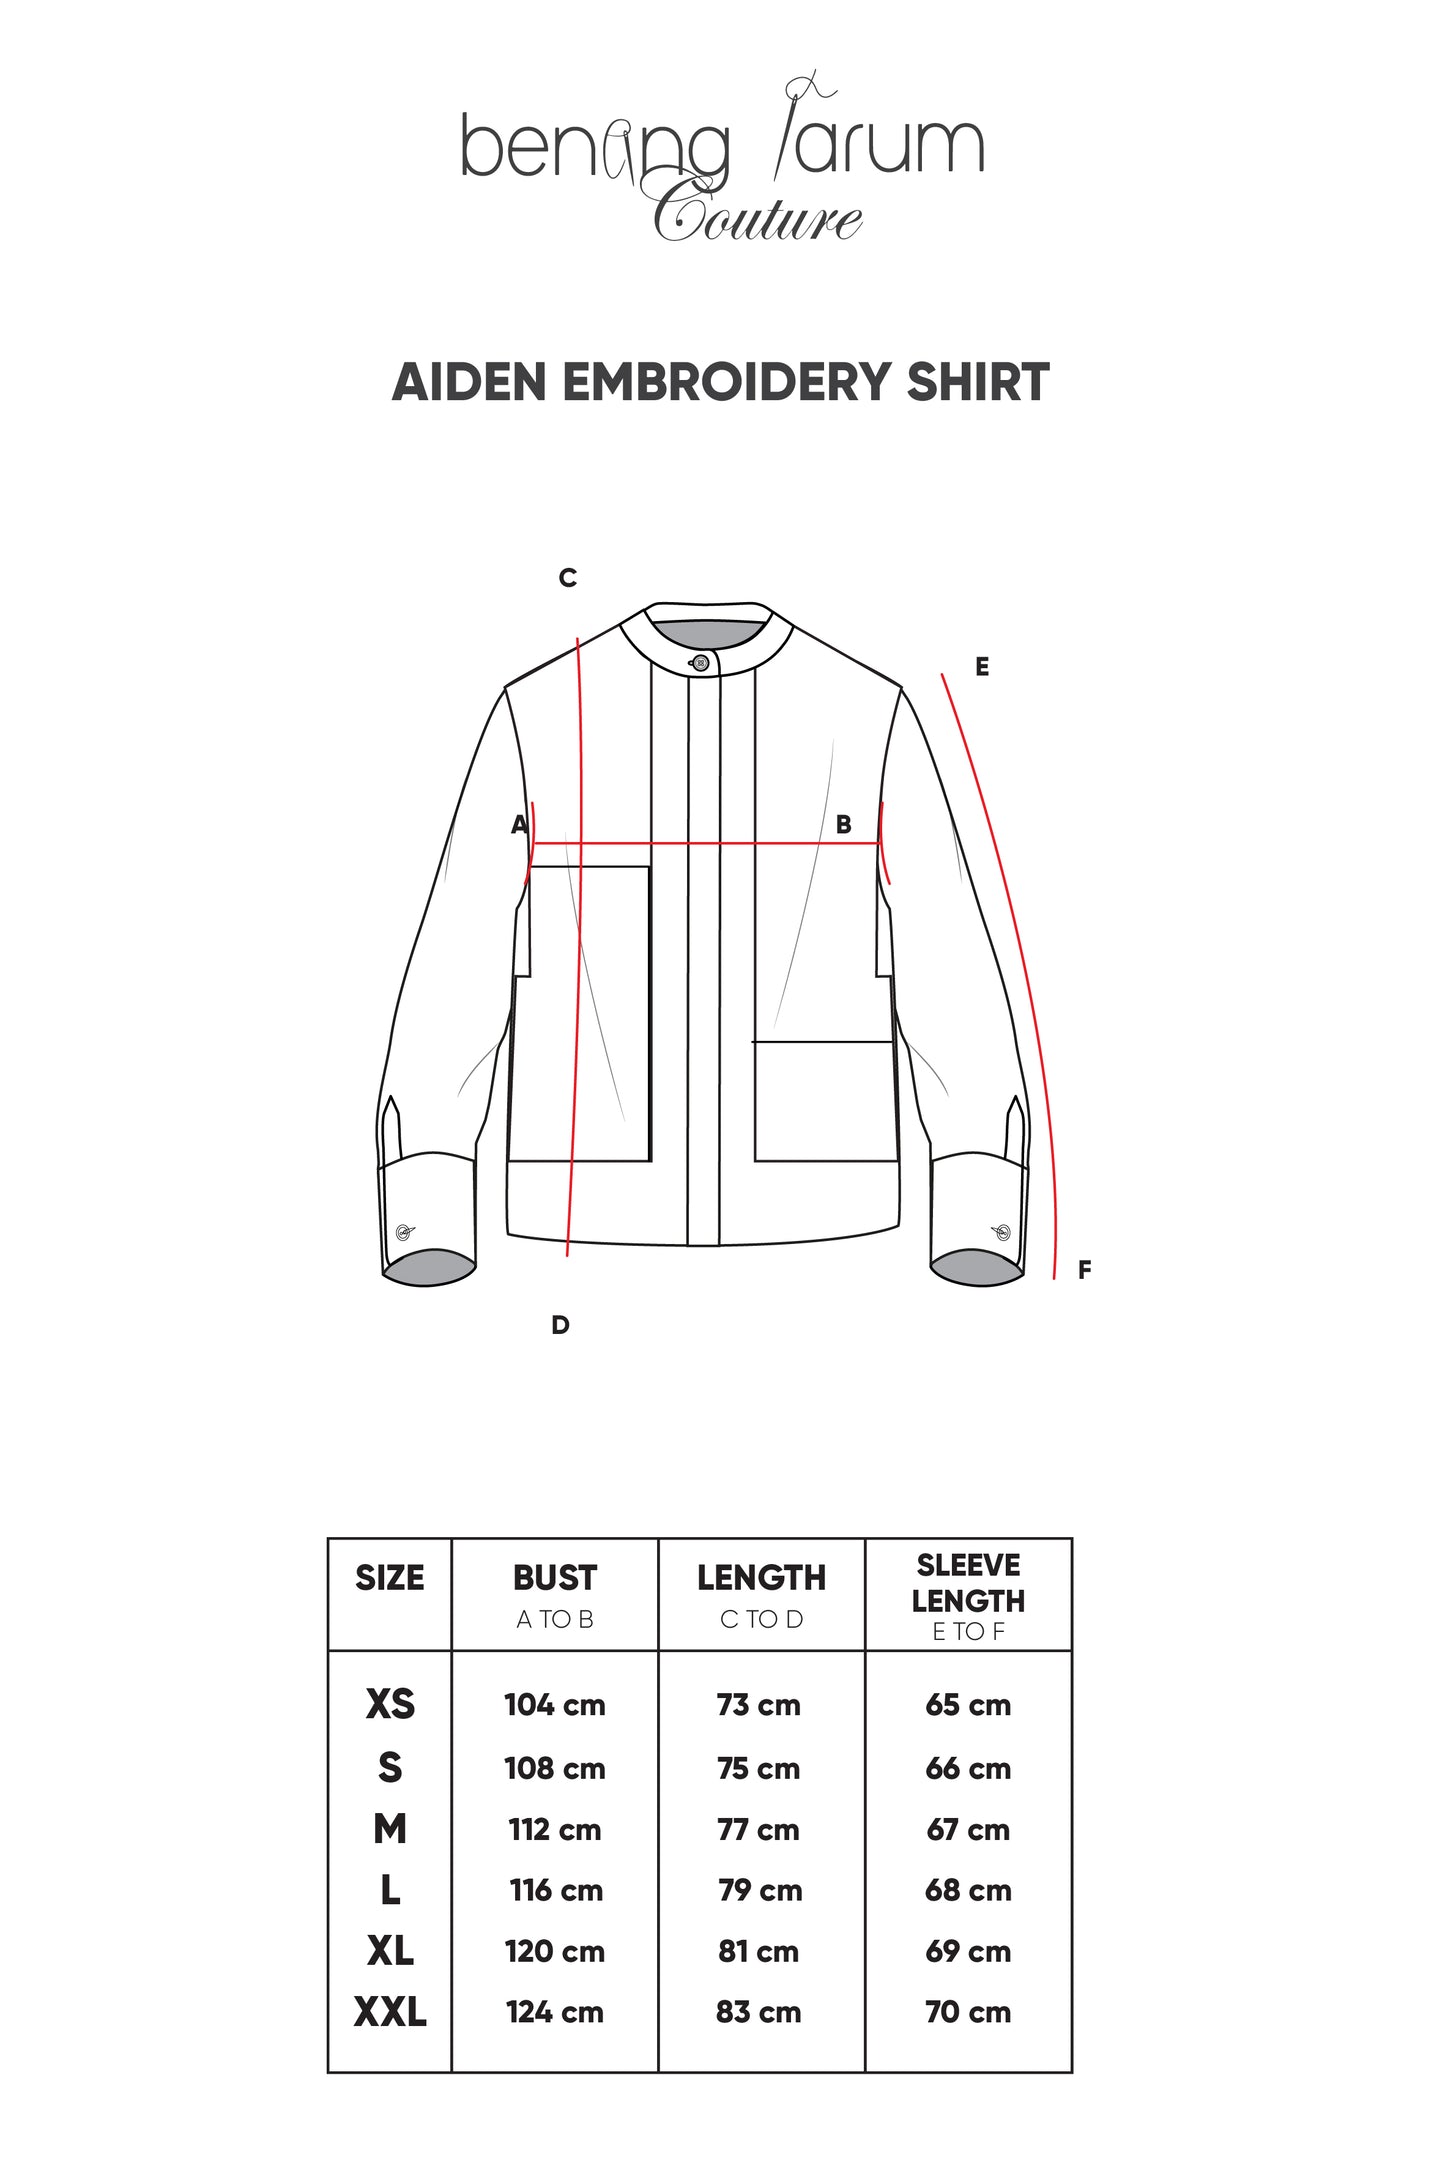 Aiden Embroidery Shirt